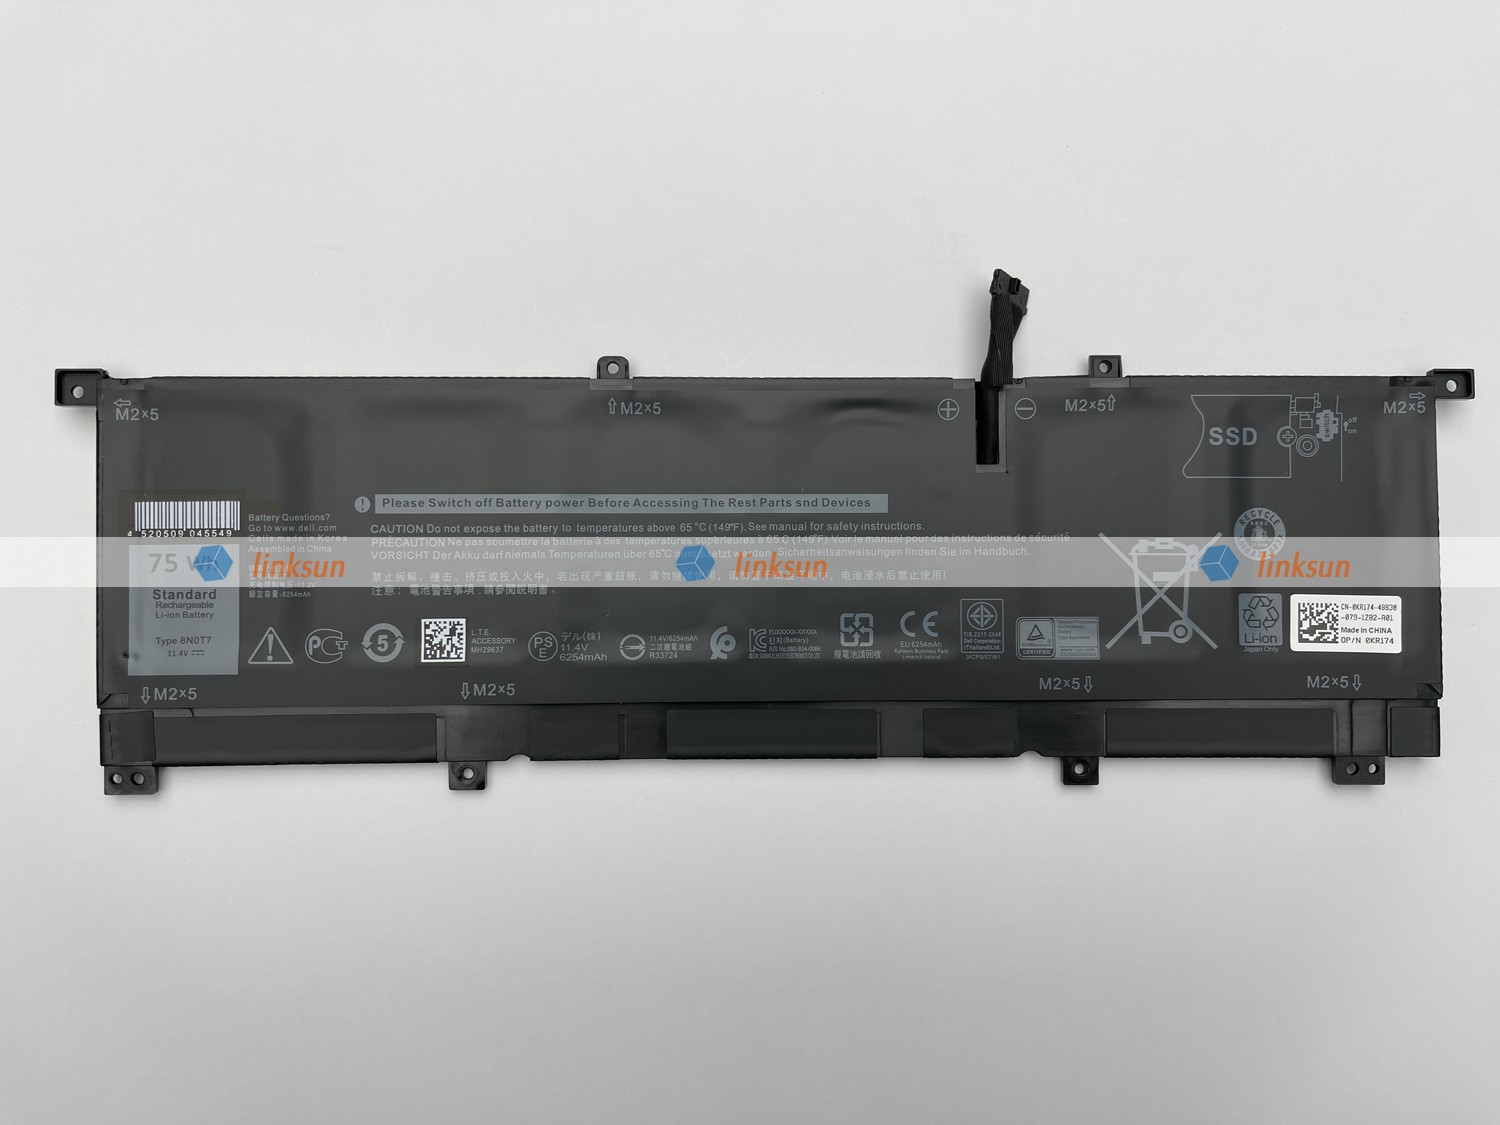 8N0T7 battery front